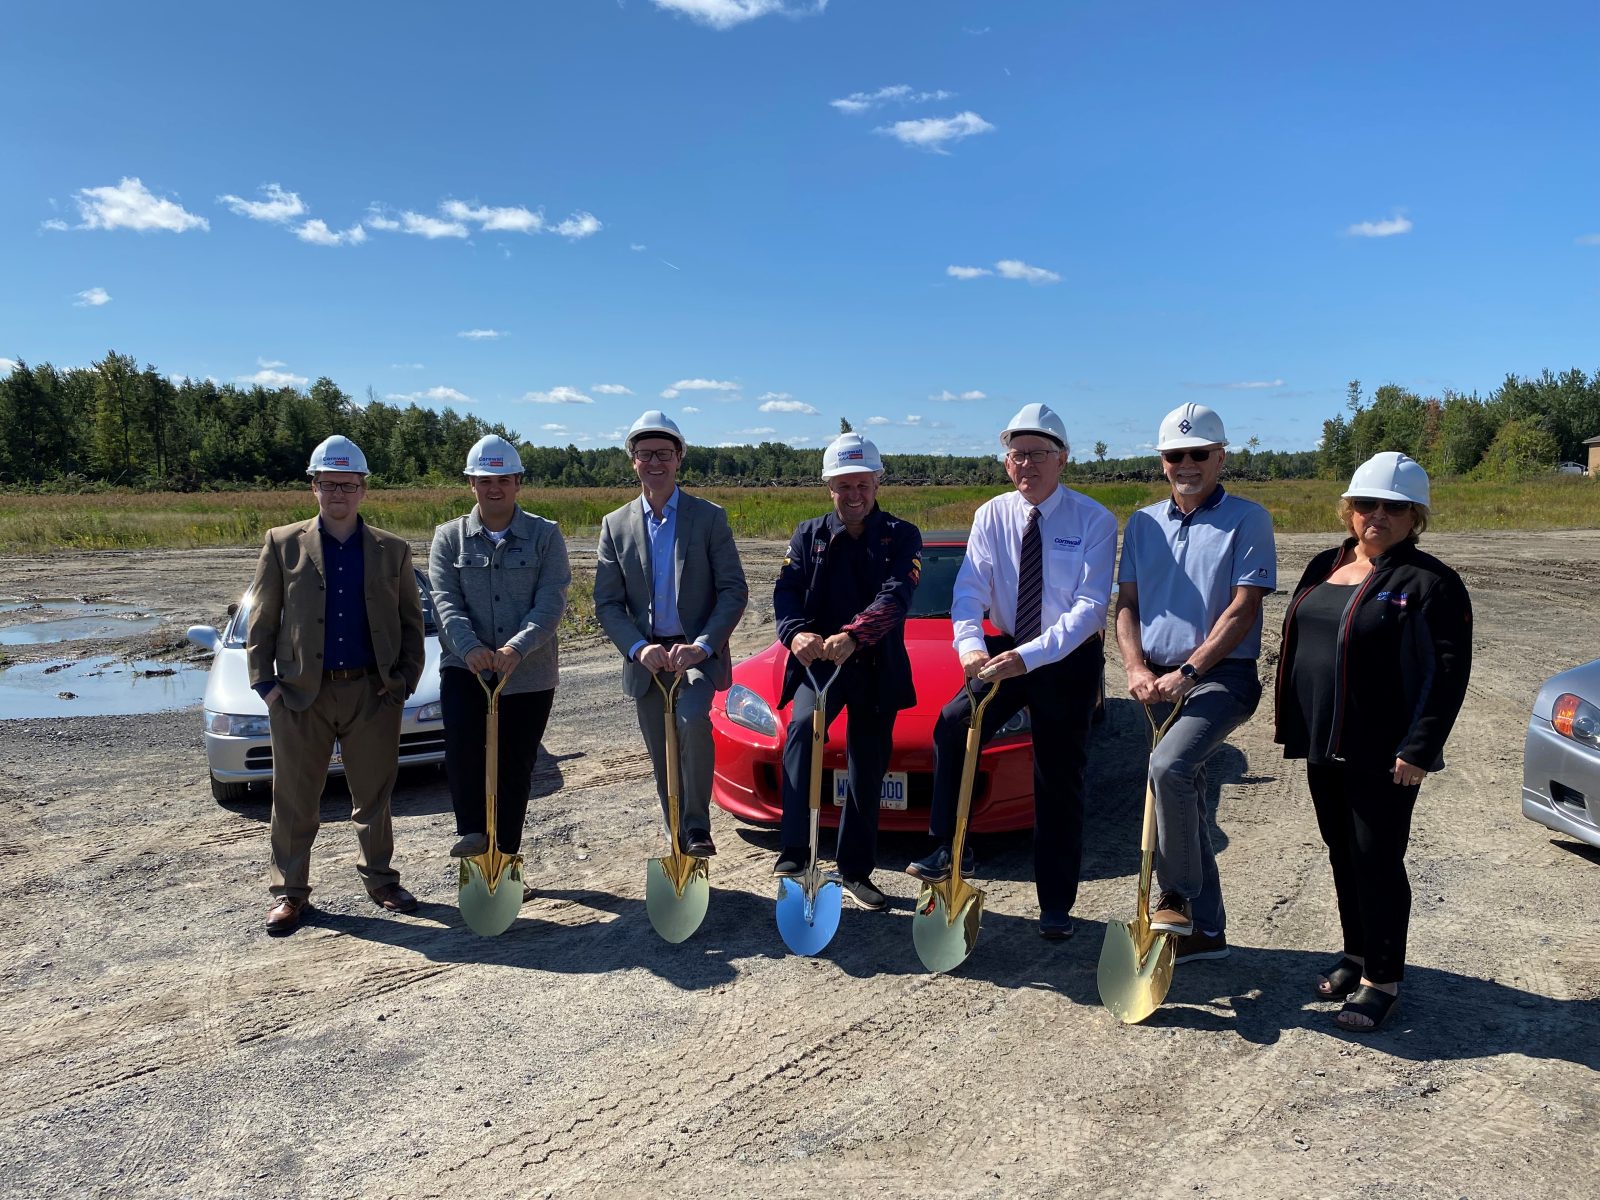 One of Canada’s first Honda Dealerships breaks ground in preparation of next gen vehicles